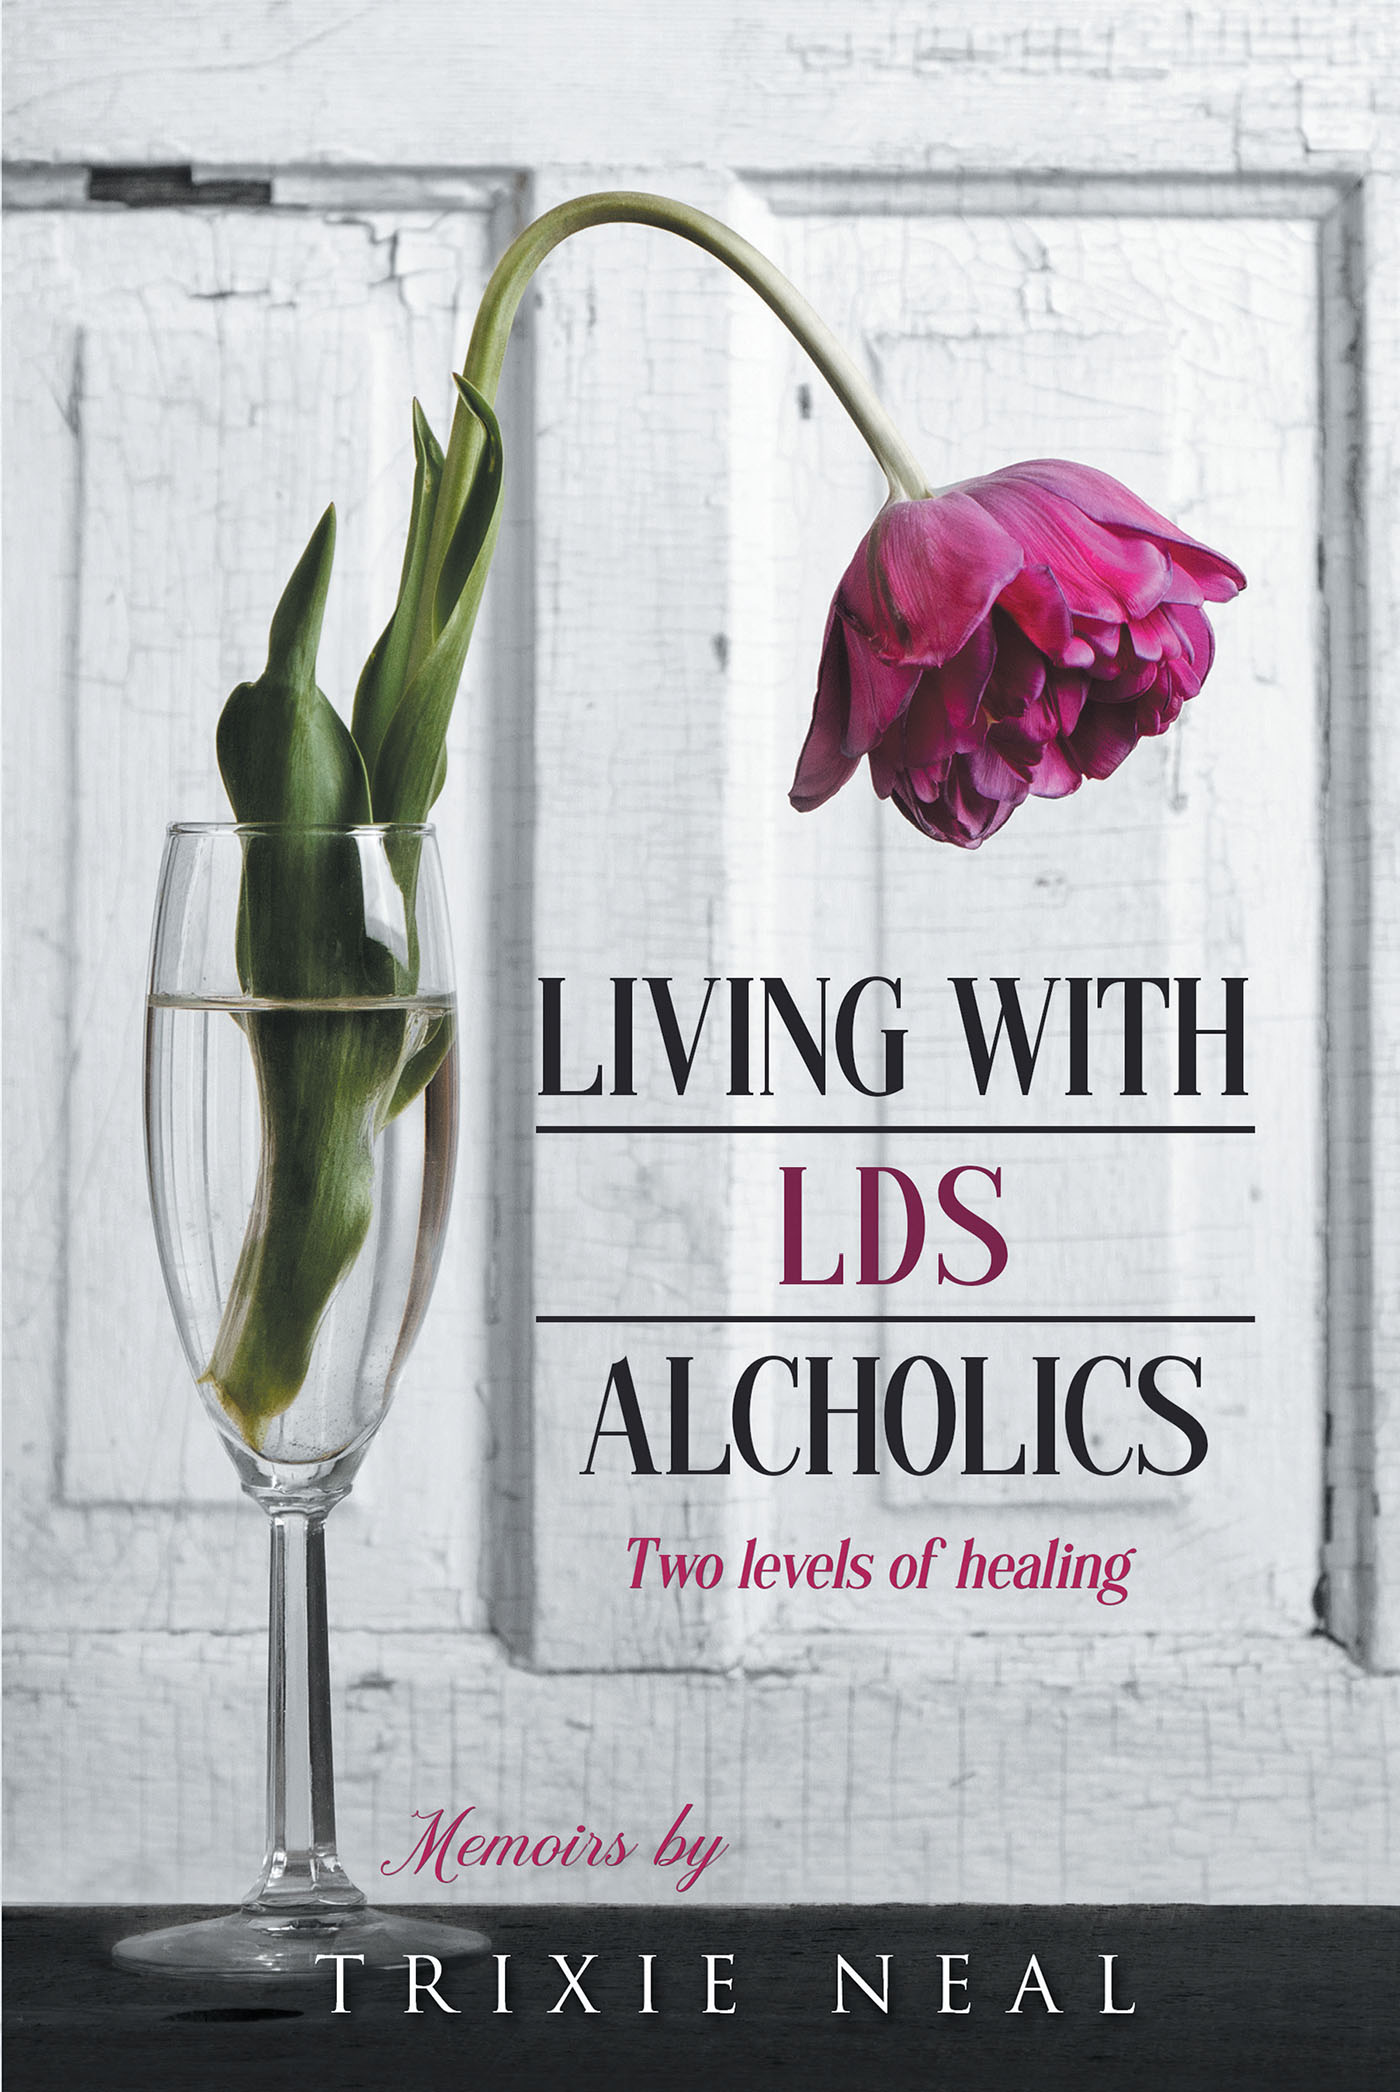 Trixie Neal’s New Book, “Living with LDS Alcoholics: Two levels of healing,” Reveals How Alcoholism Impacted the Author's Family, Beginning with Her Early Childhood Years